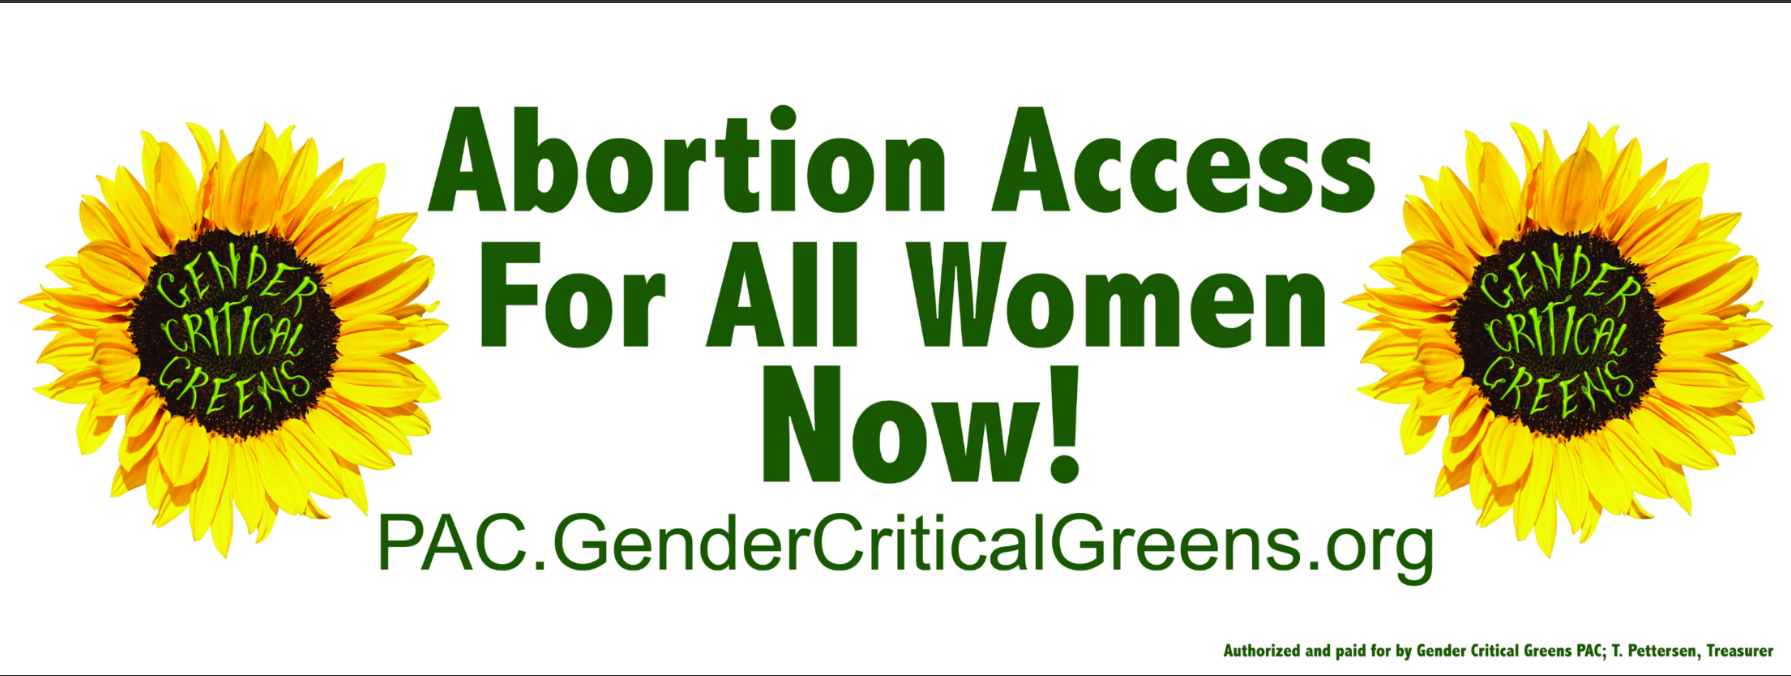 Gender Critical Greens PAC Banner: Abortion Access for All Women Now!